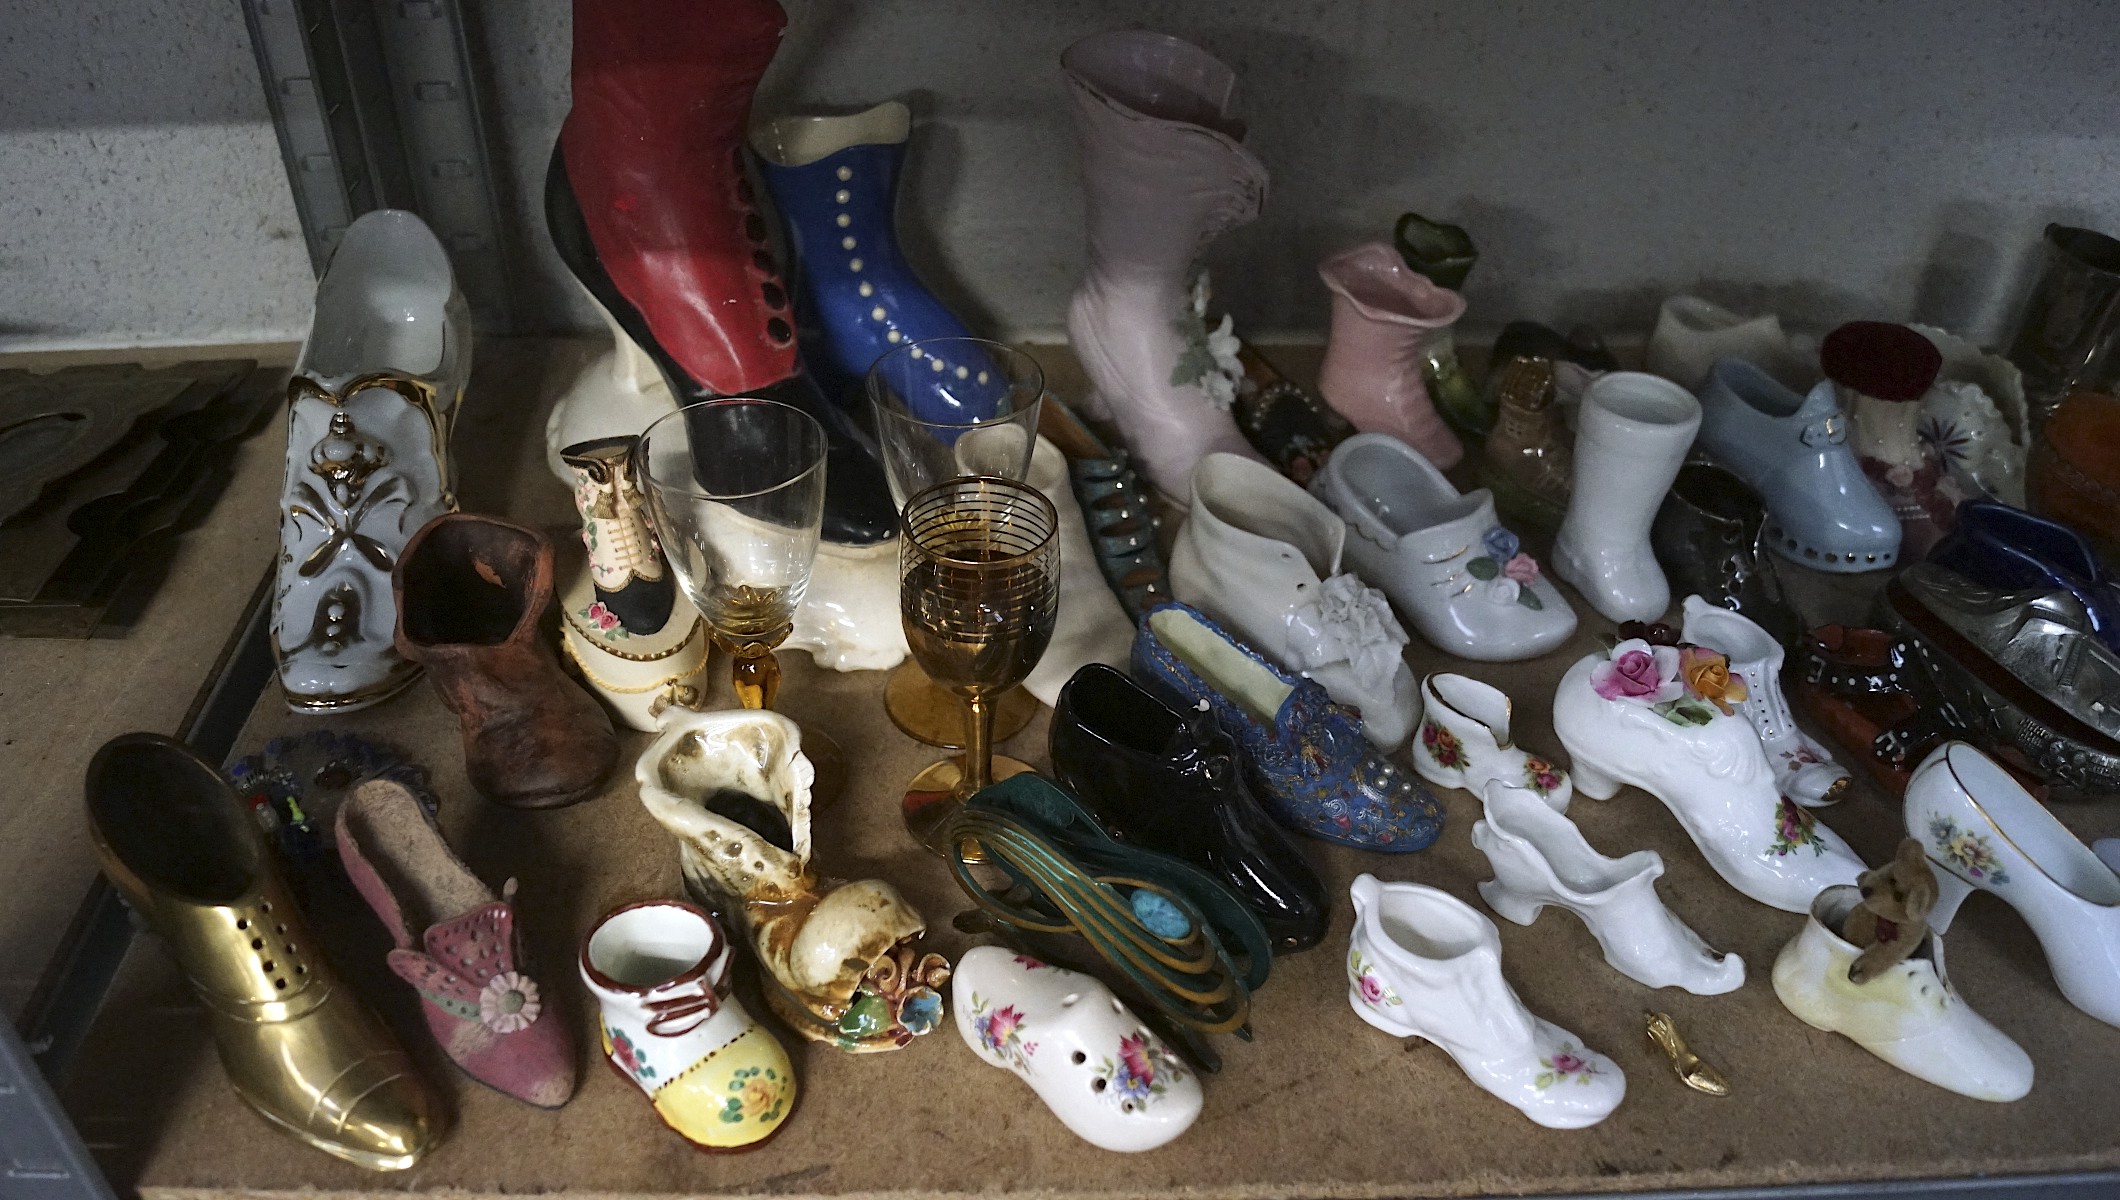 A large collection of ceramic and pottery shoe and boot ornaments, - Image 4 of 5